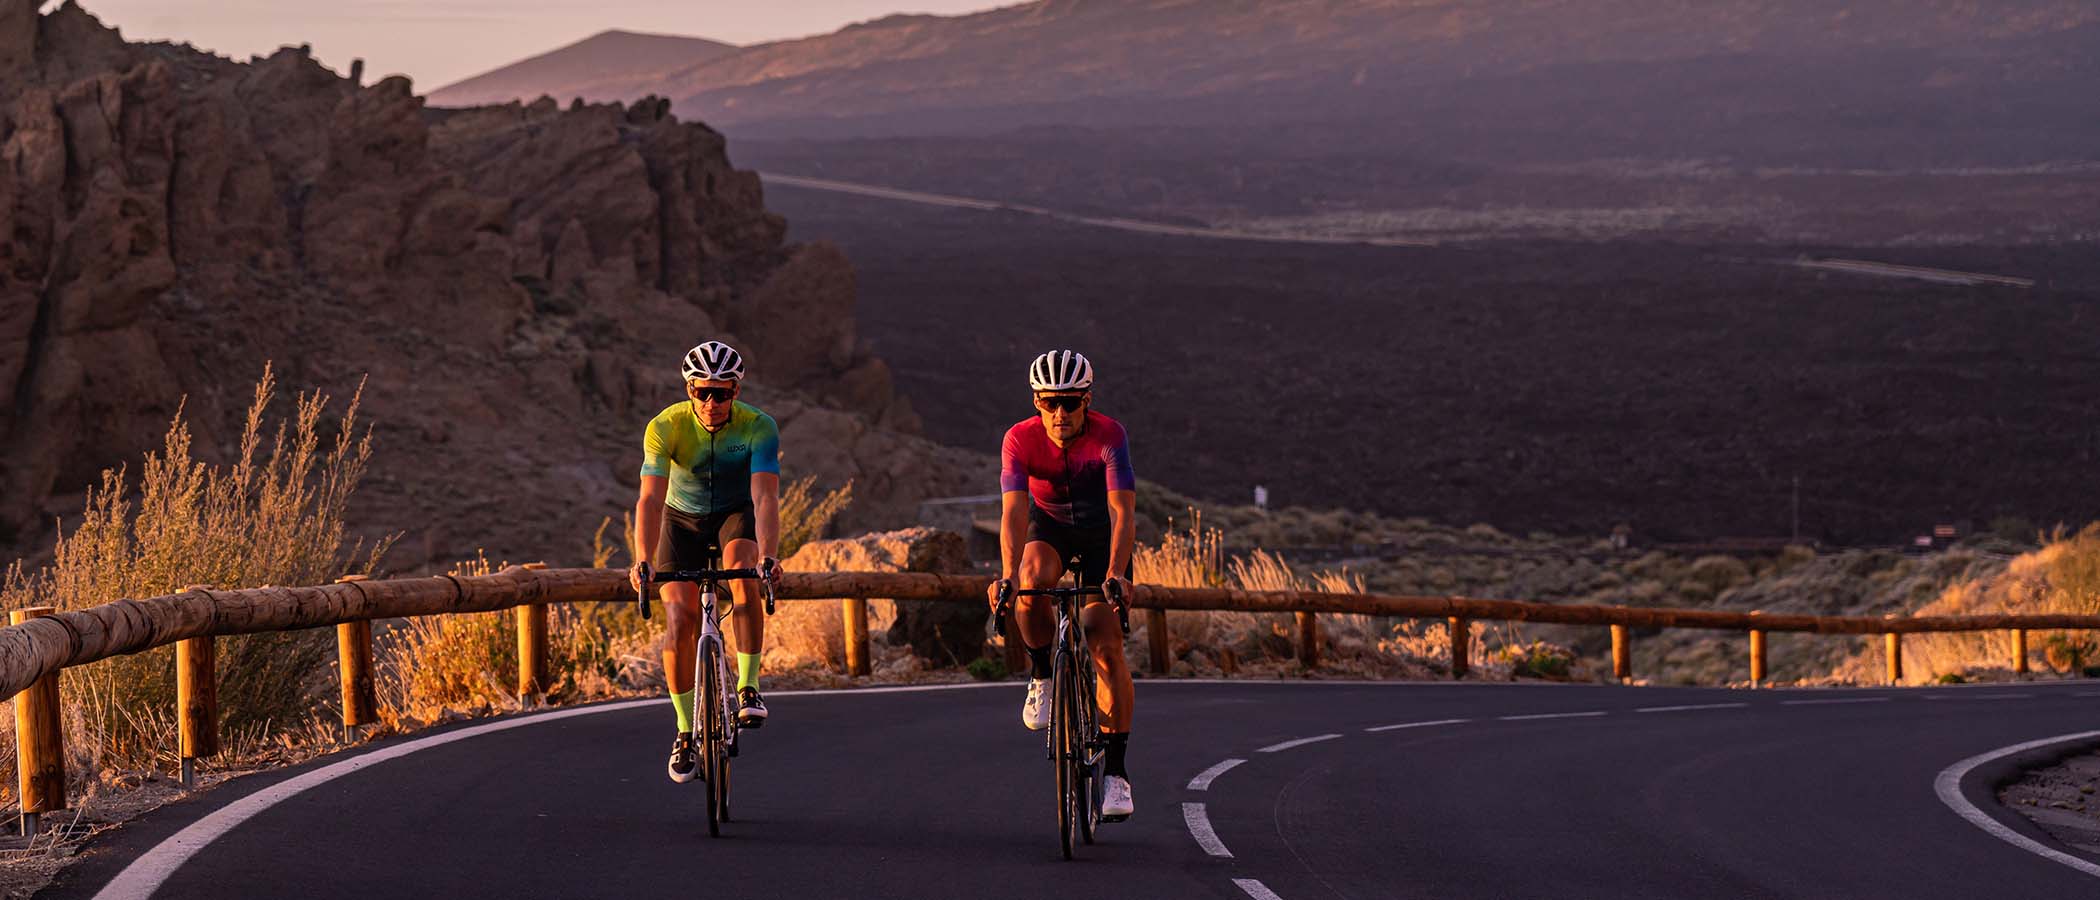 road cyclists are riding on the road and wearing Luxa Prism Orange Jerseys